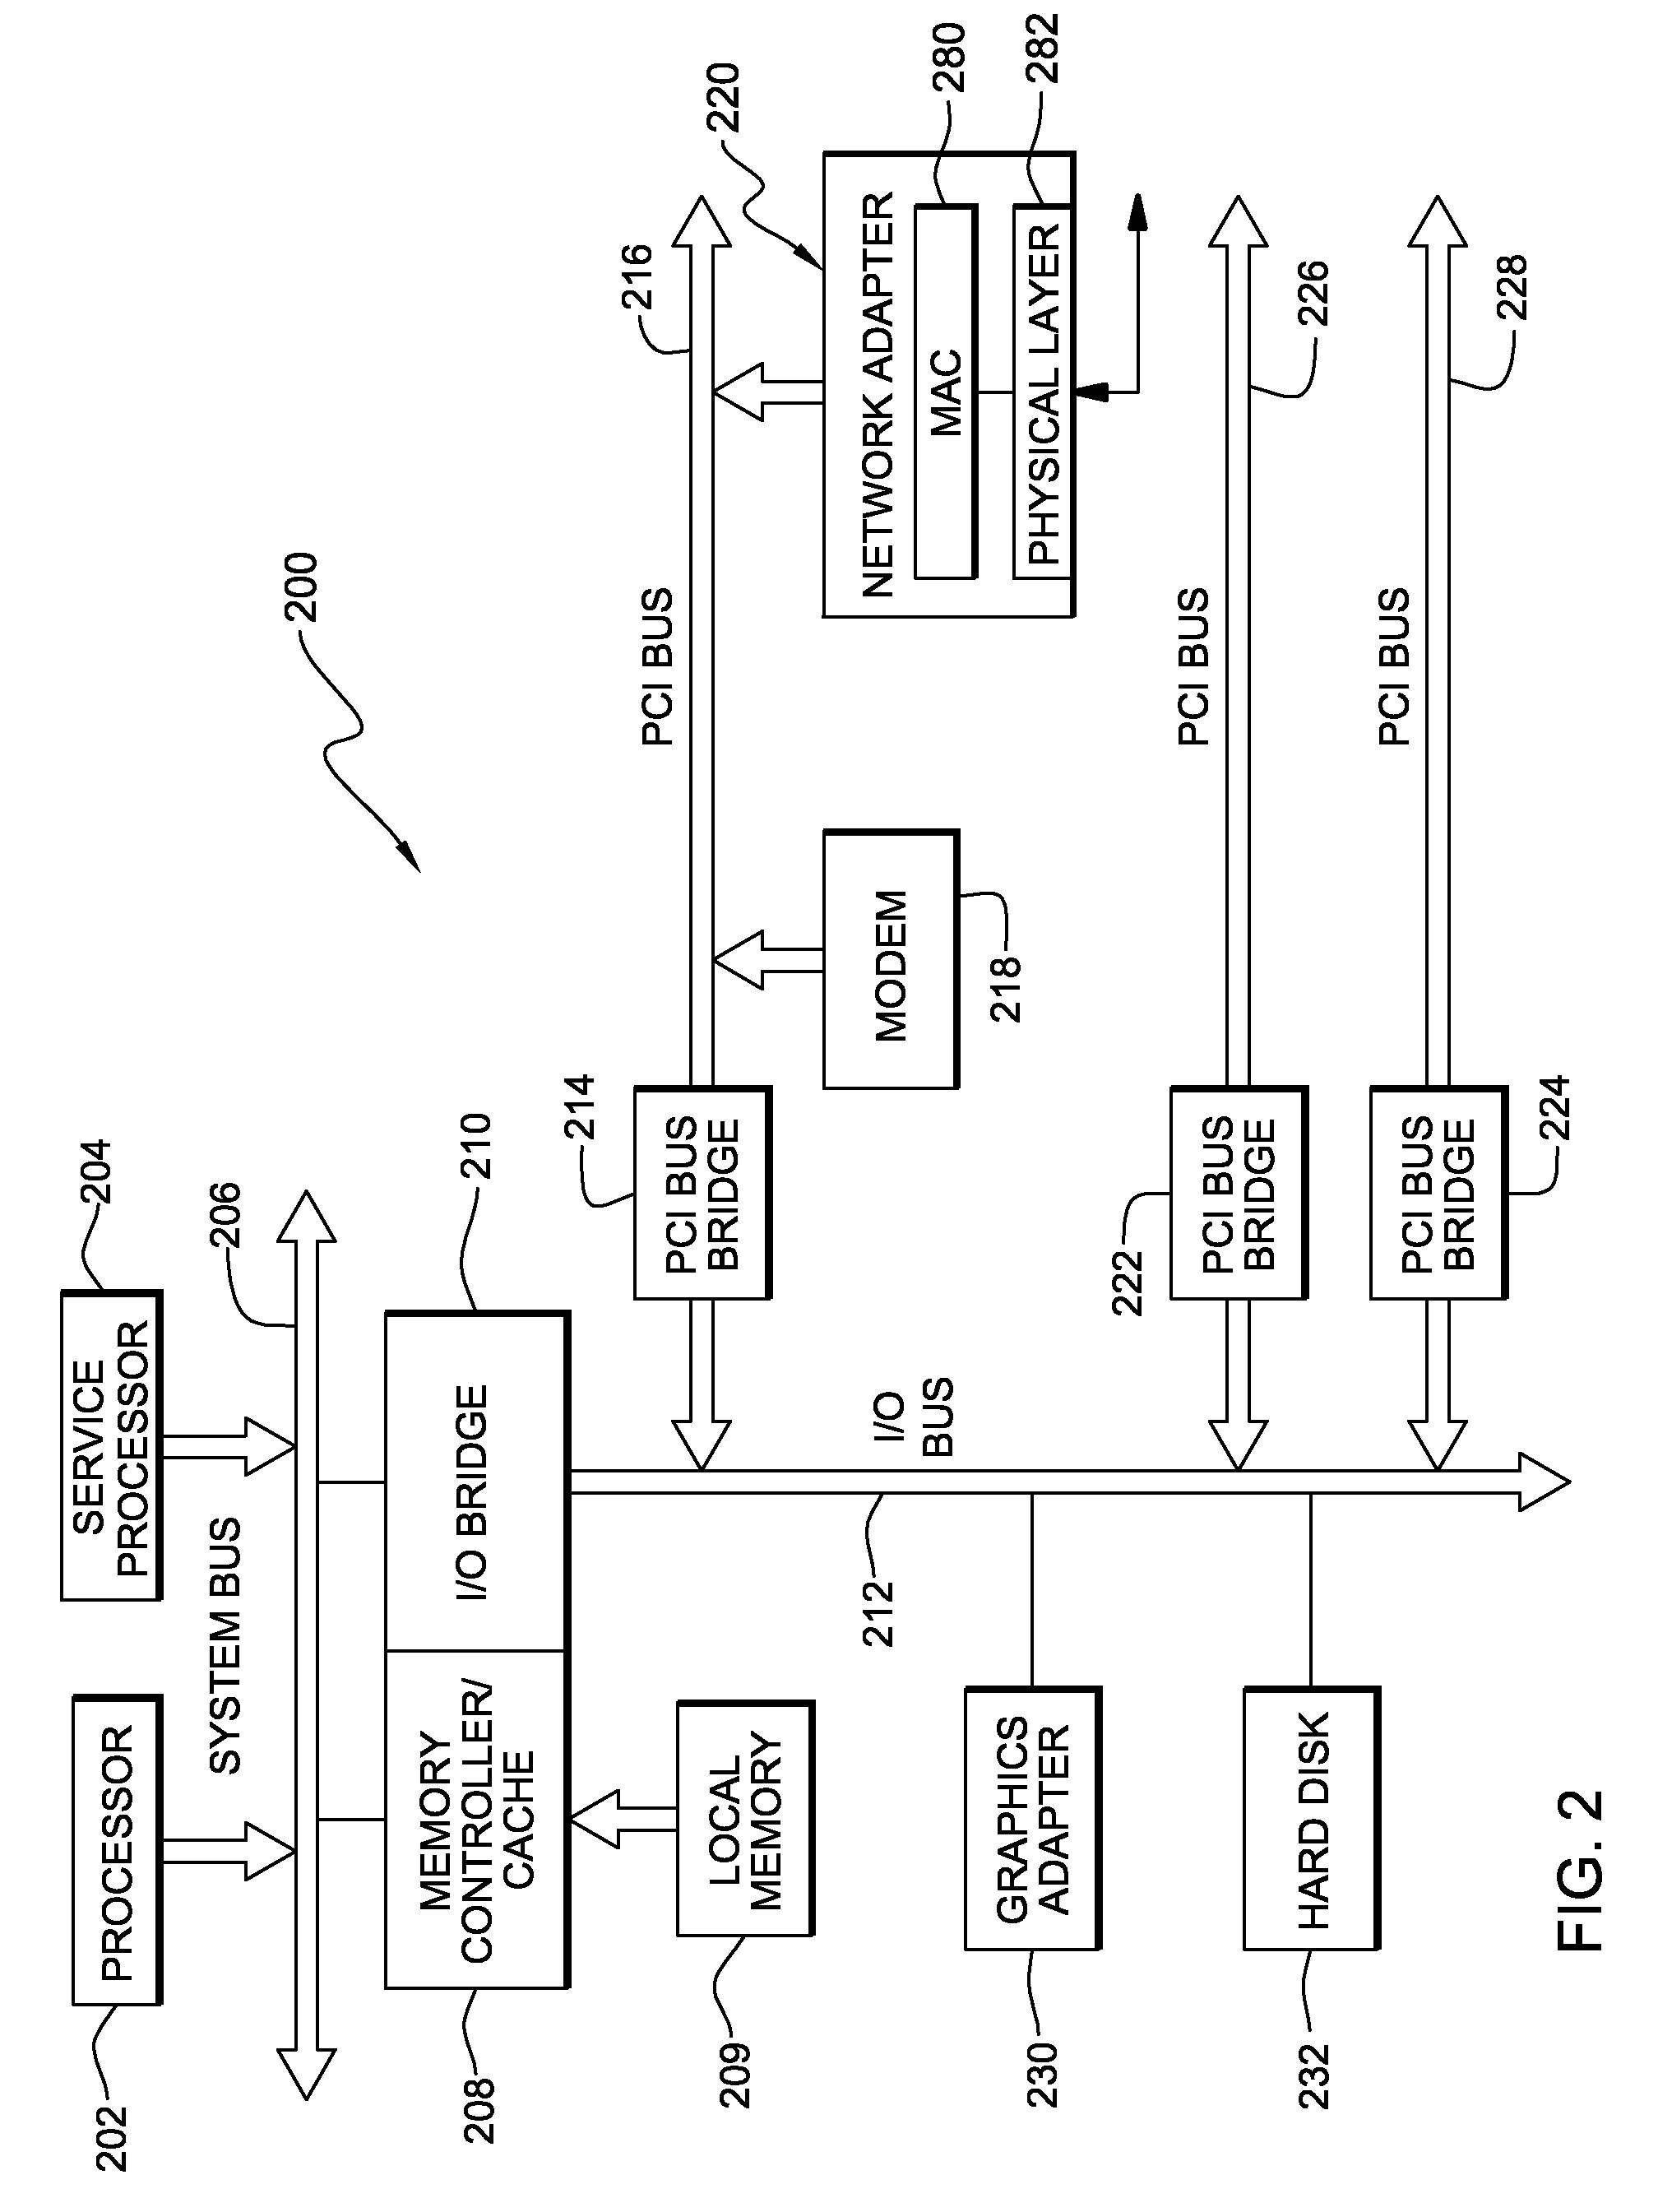 Controlled Shut-Down of Partitions Within a Shared Memory Partition Data Processing System